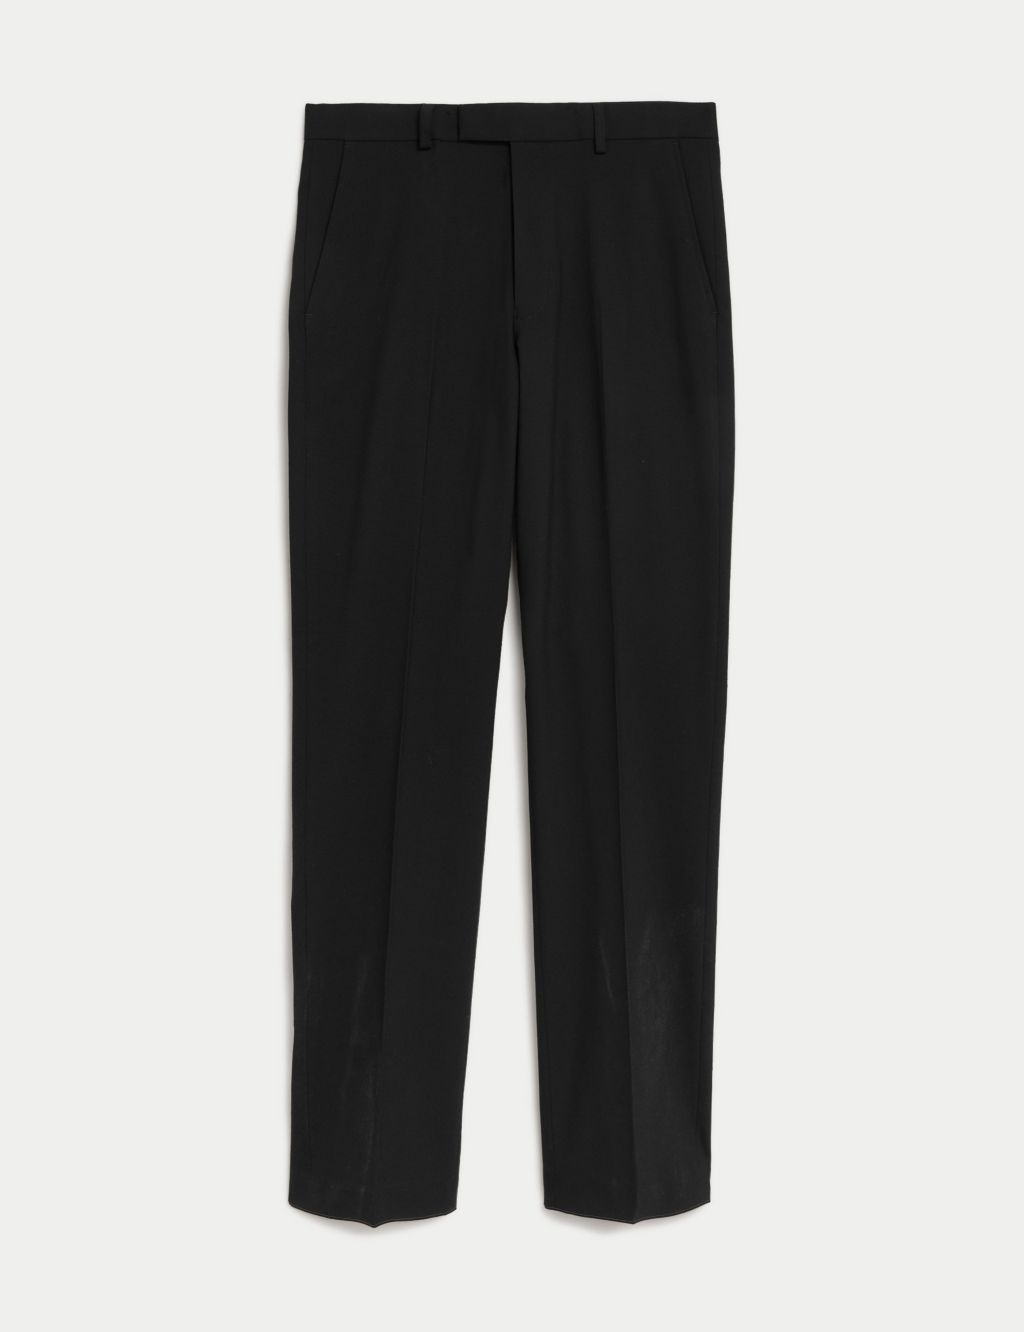 Black Regular Fit Stretch Suit Trousers | M&S Collection | M&S